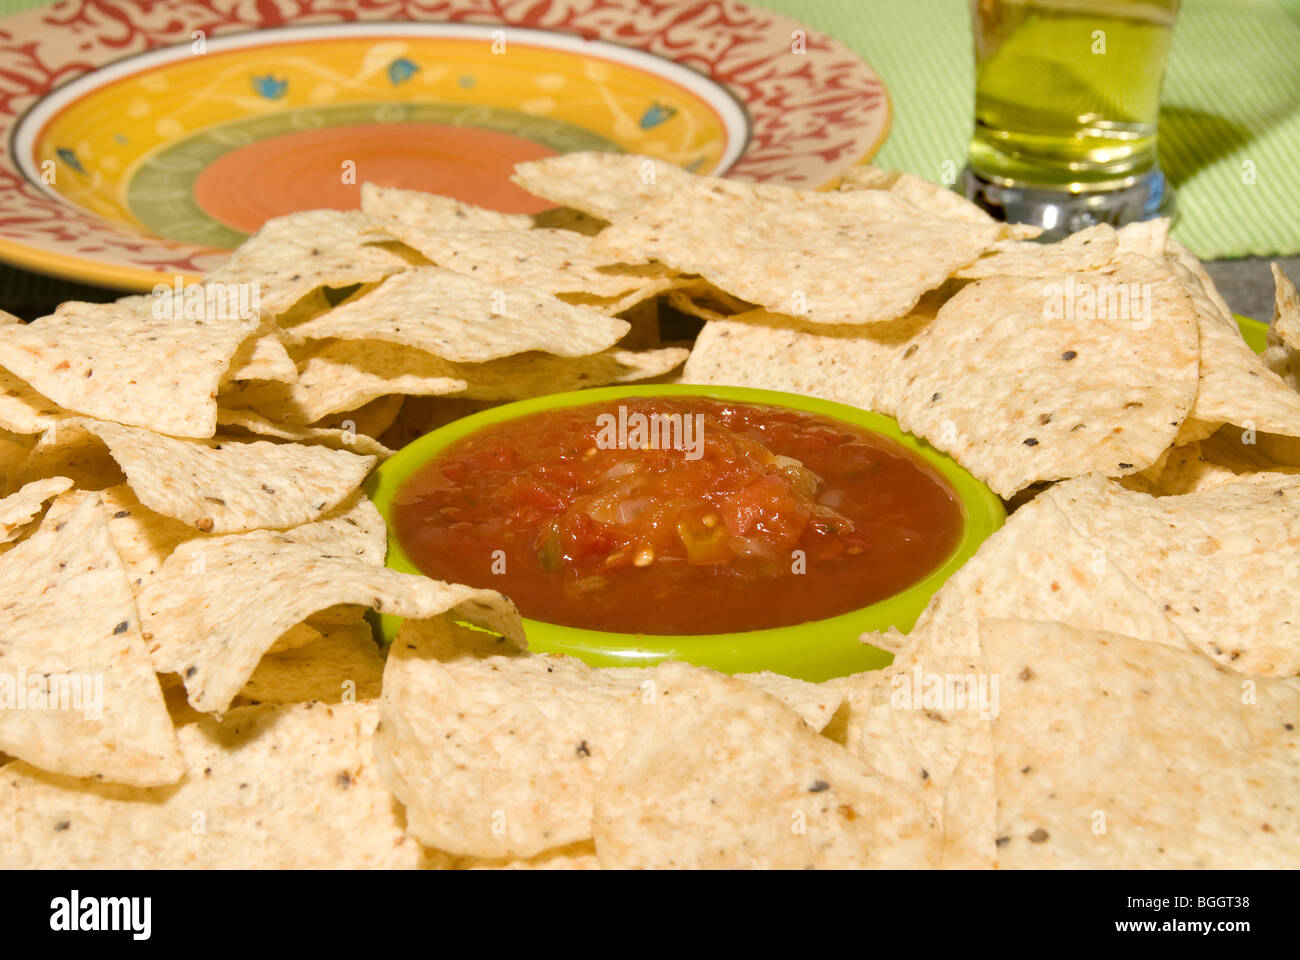 A place setting of tortilla chips with a Mexican style plate waiting to be loaded with snack food Stock Photo